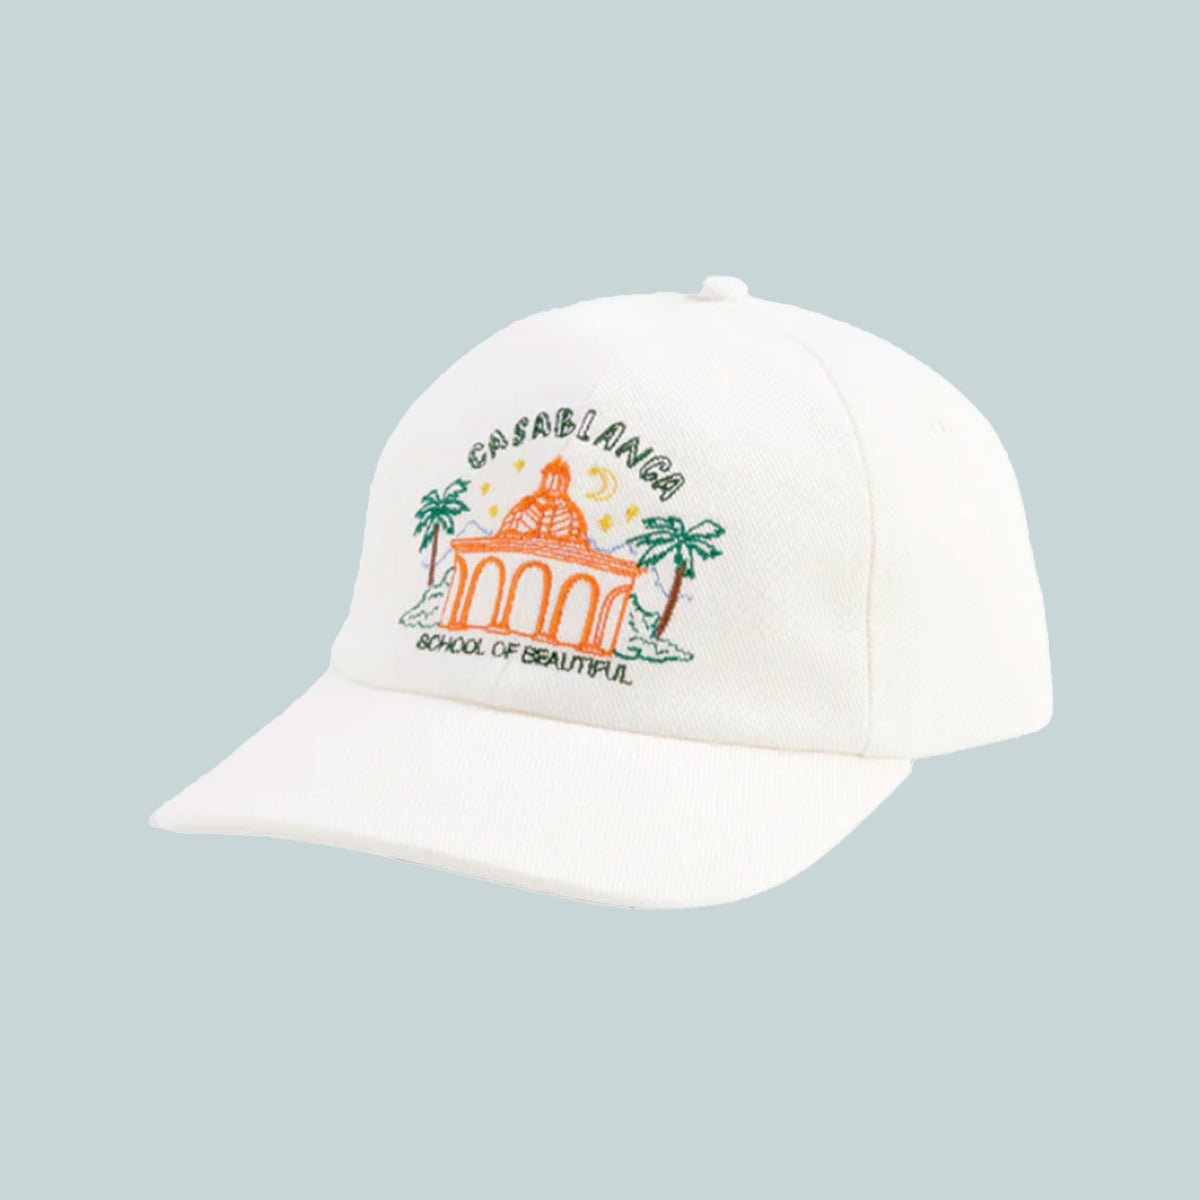 School of beautiful embroidered cap